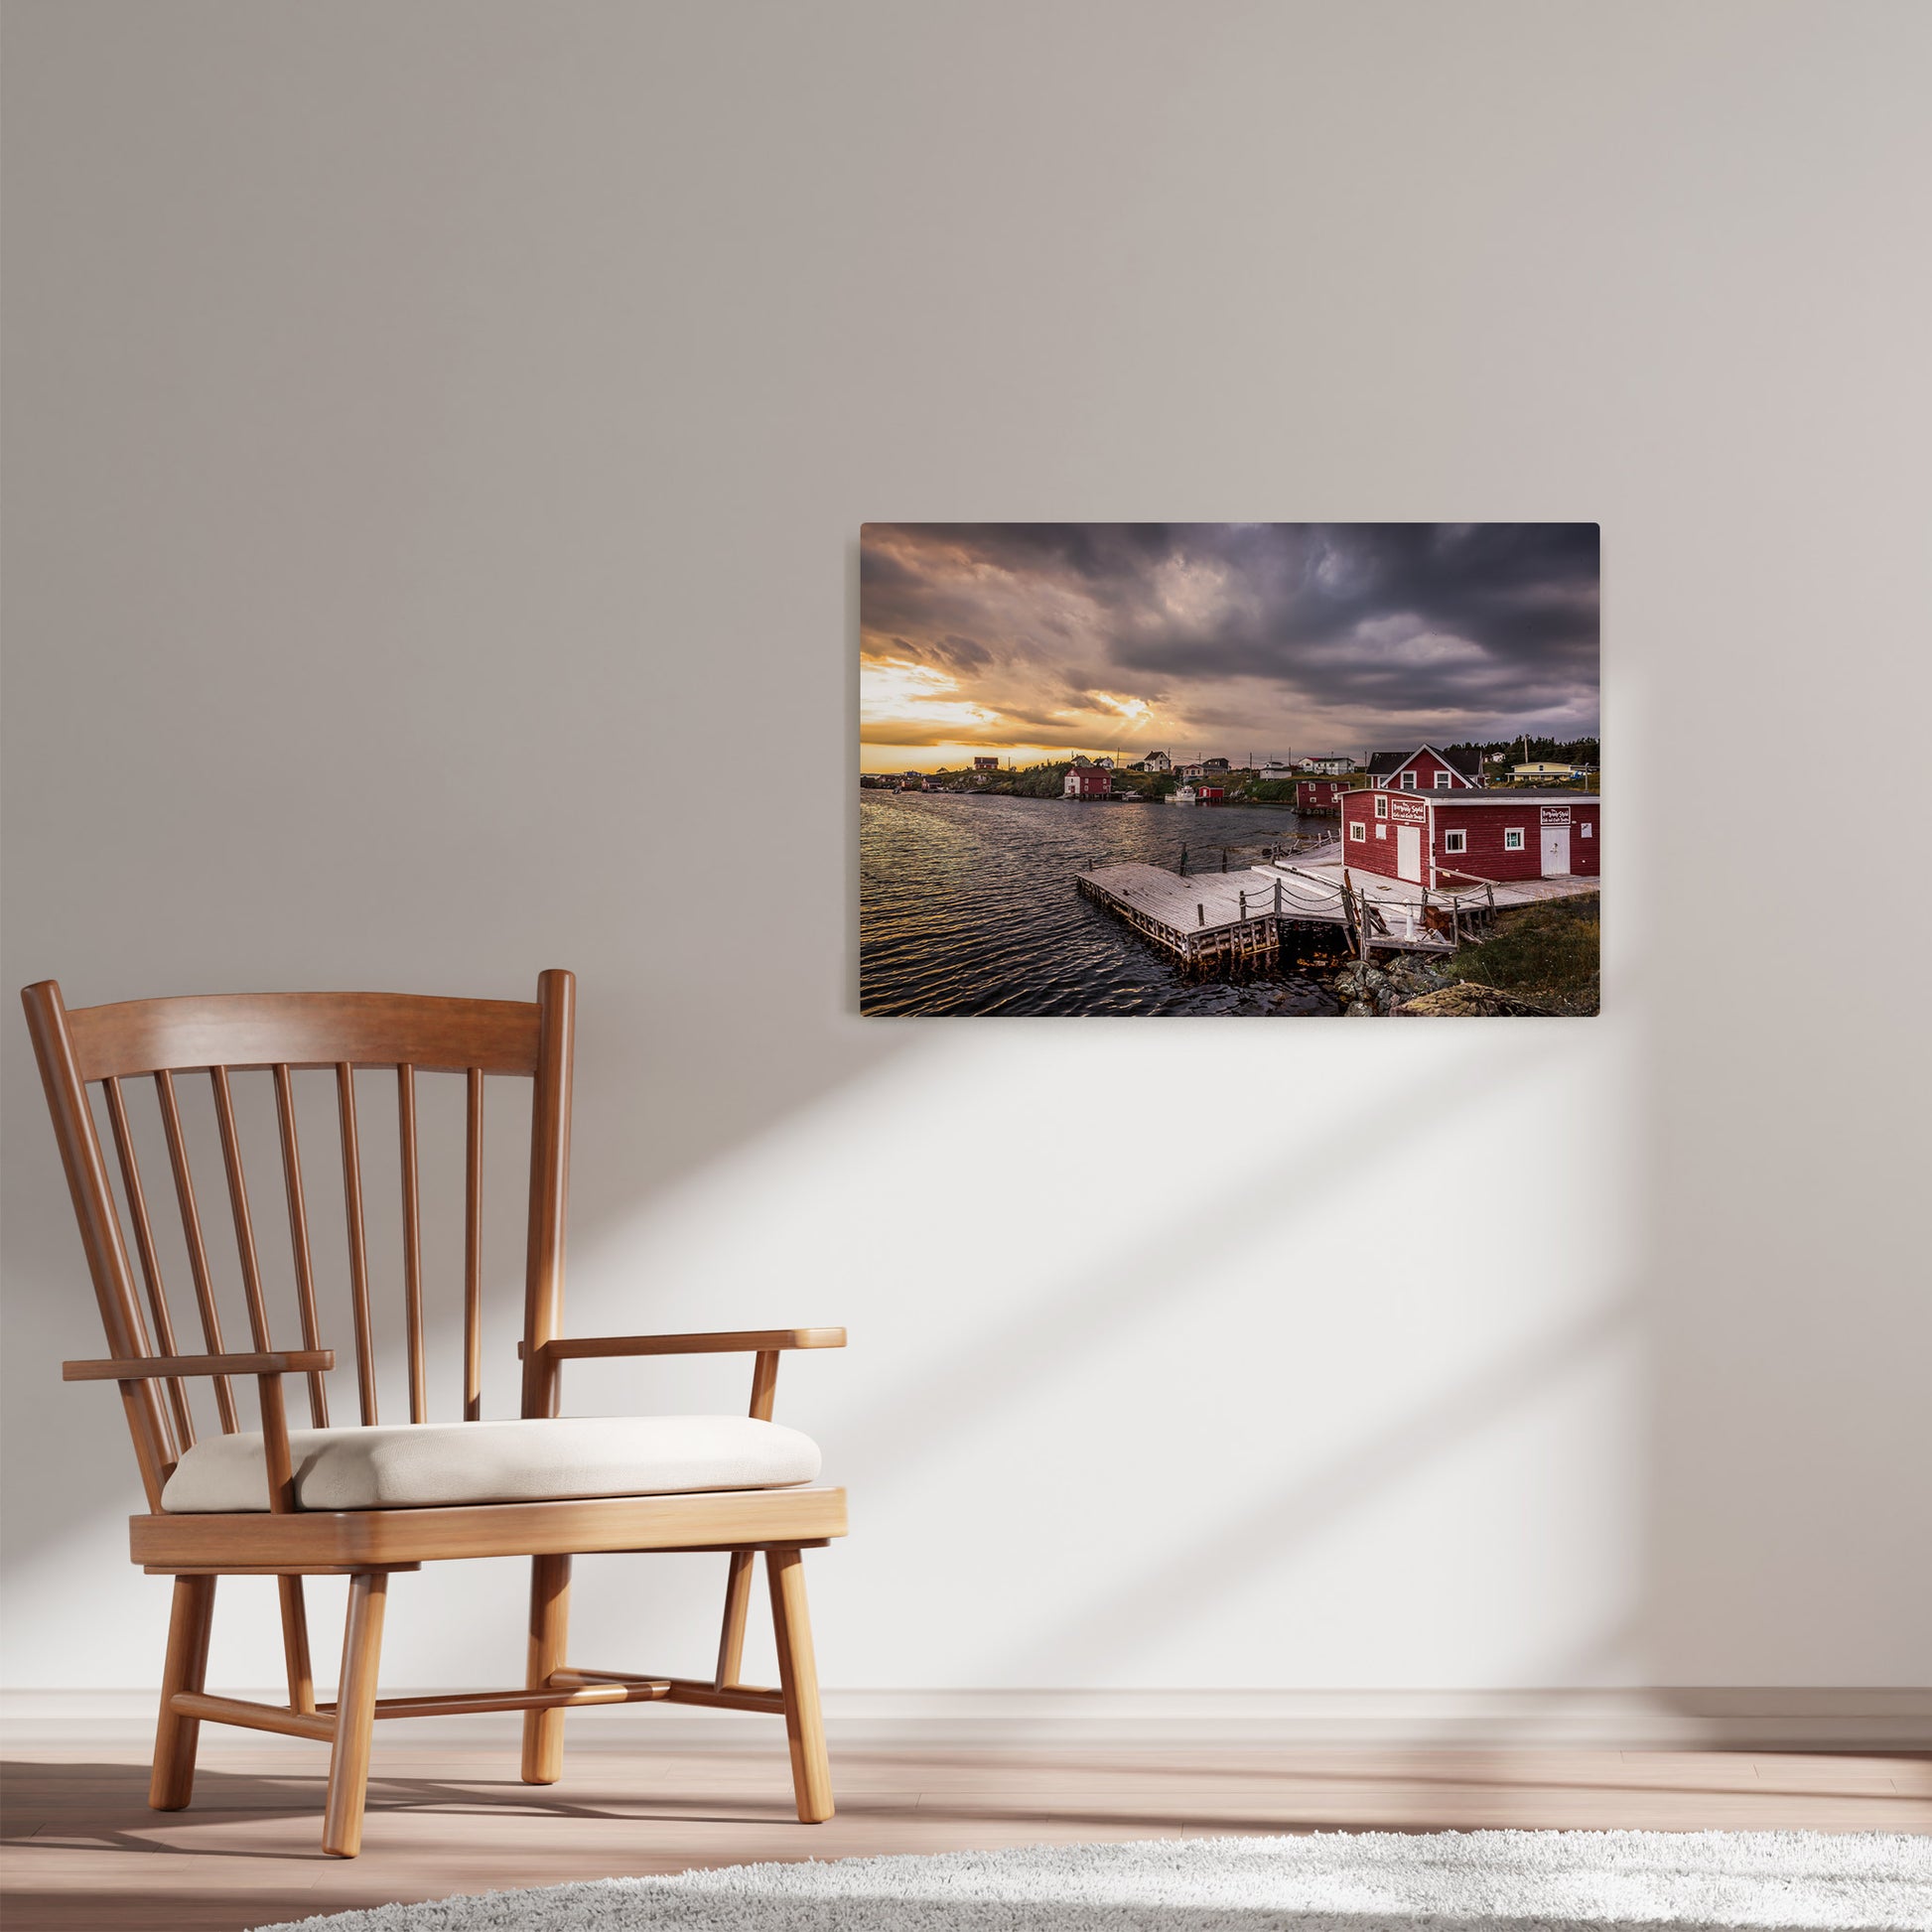 Ray Mackey's Change Islands Causeway photography reproduced on HD metal print and displayed on wall